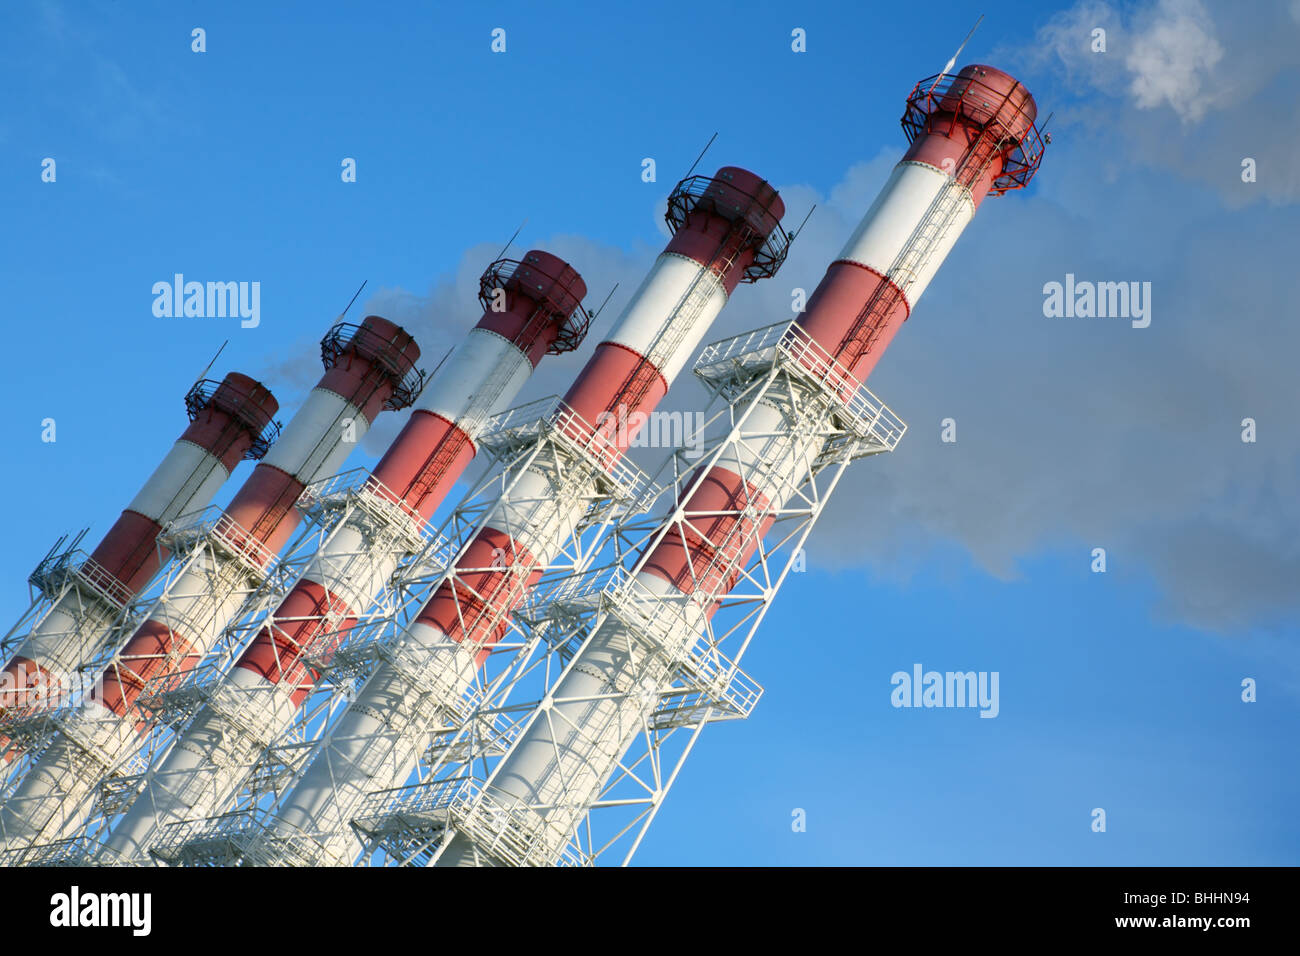 Five chimneys with steam on a blue sky background. Tilt view. Stock Photo